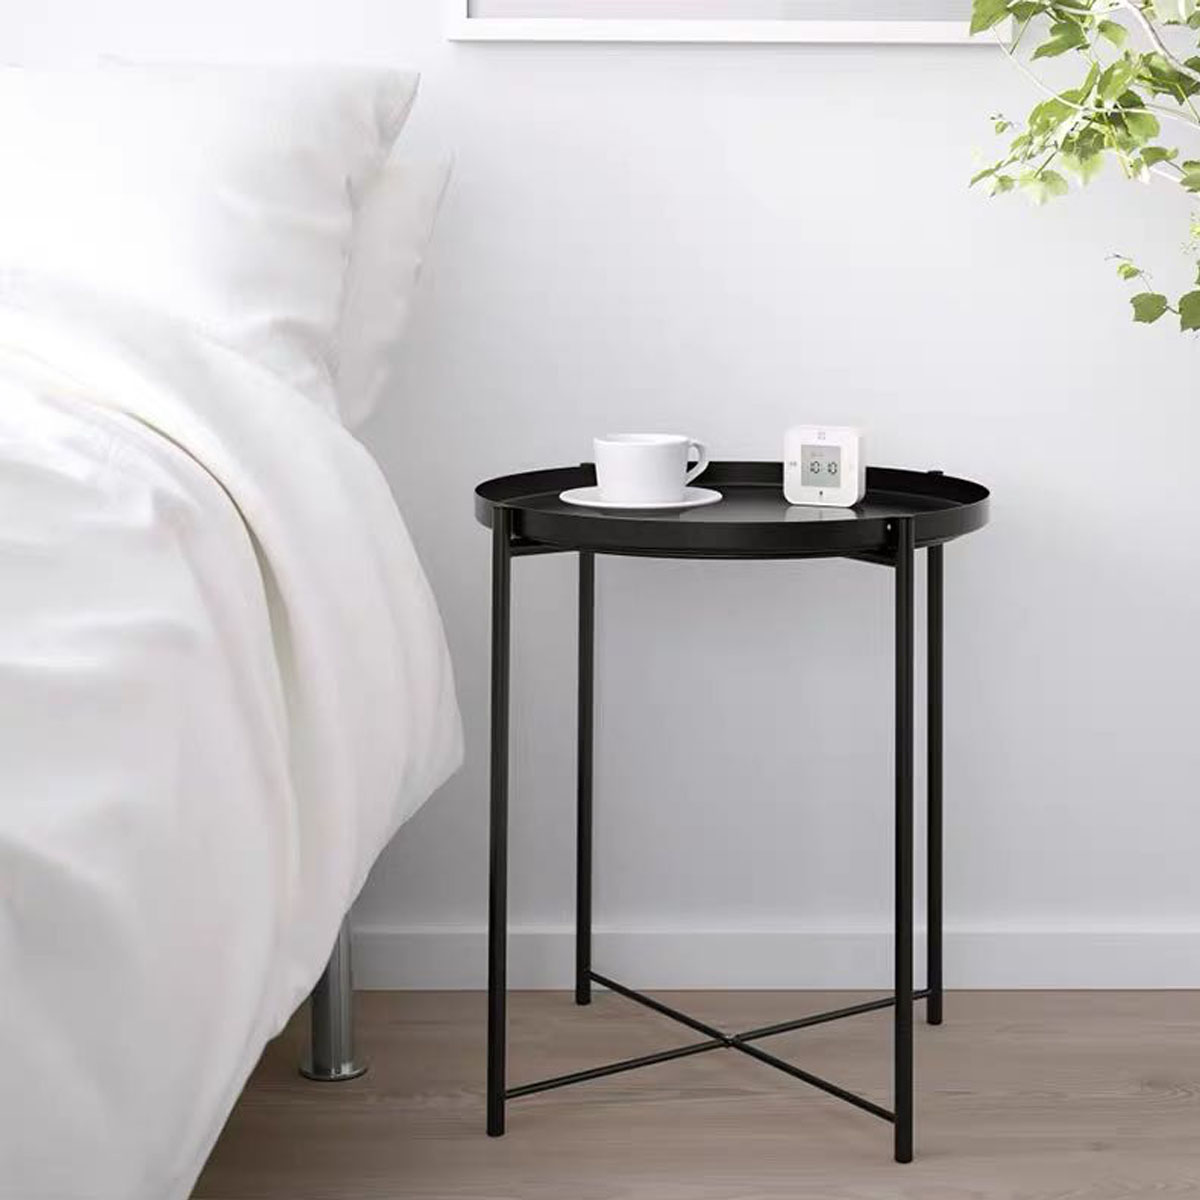 4452cm-Round-Side-End-Coffee-Table-Steel-Tray-Metal-Side-Desk-Furniture-for-Home-Bedside-Storage-Sup-1767827-5